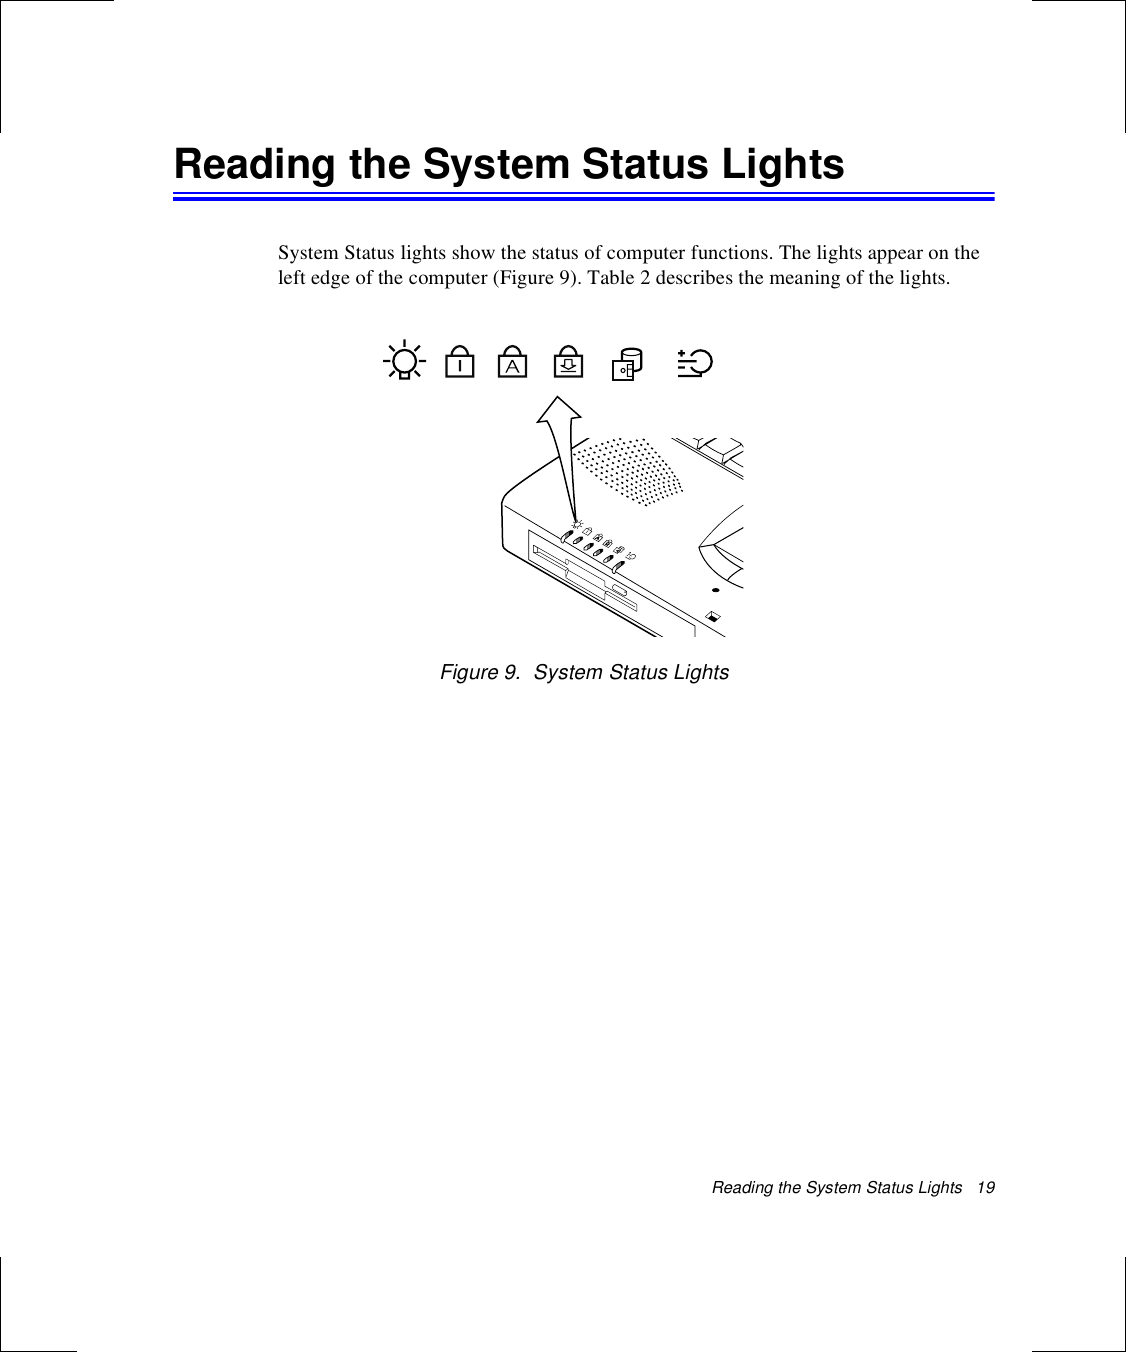 Reading the System Status Lights   19Reading the System Status LightsSystem Status lights show the status of computer functions. The lights appear on the left edge of the computer (Figure 9). Table 2 describes the meaning of the lights.Figure 9.  System Status Lights